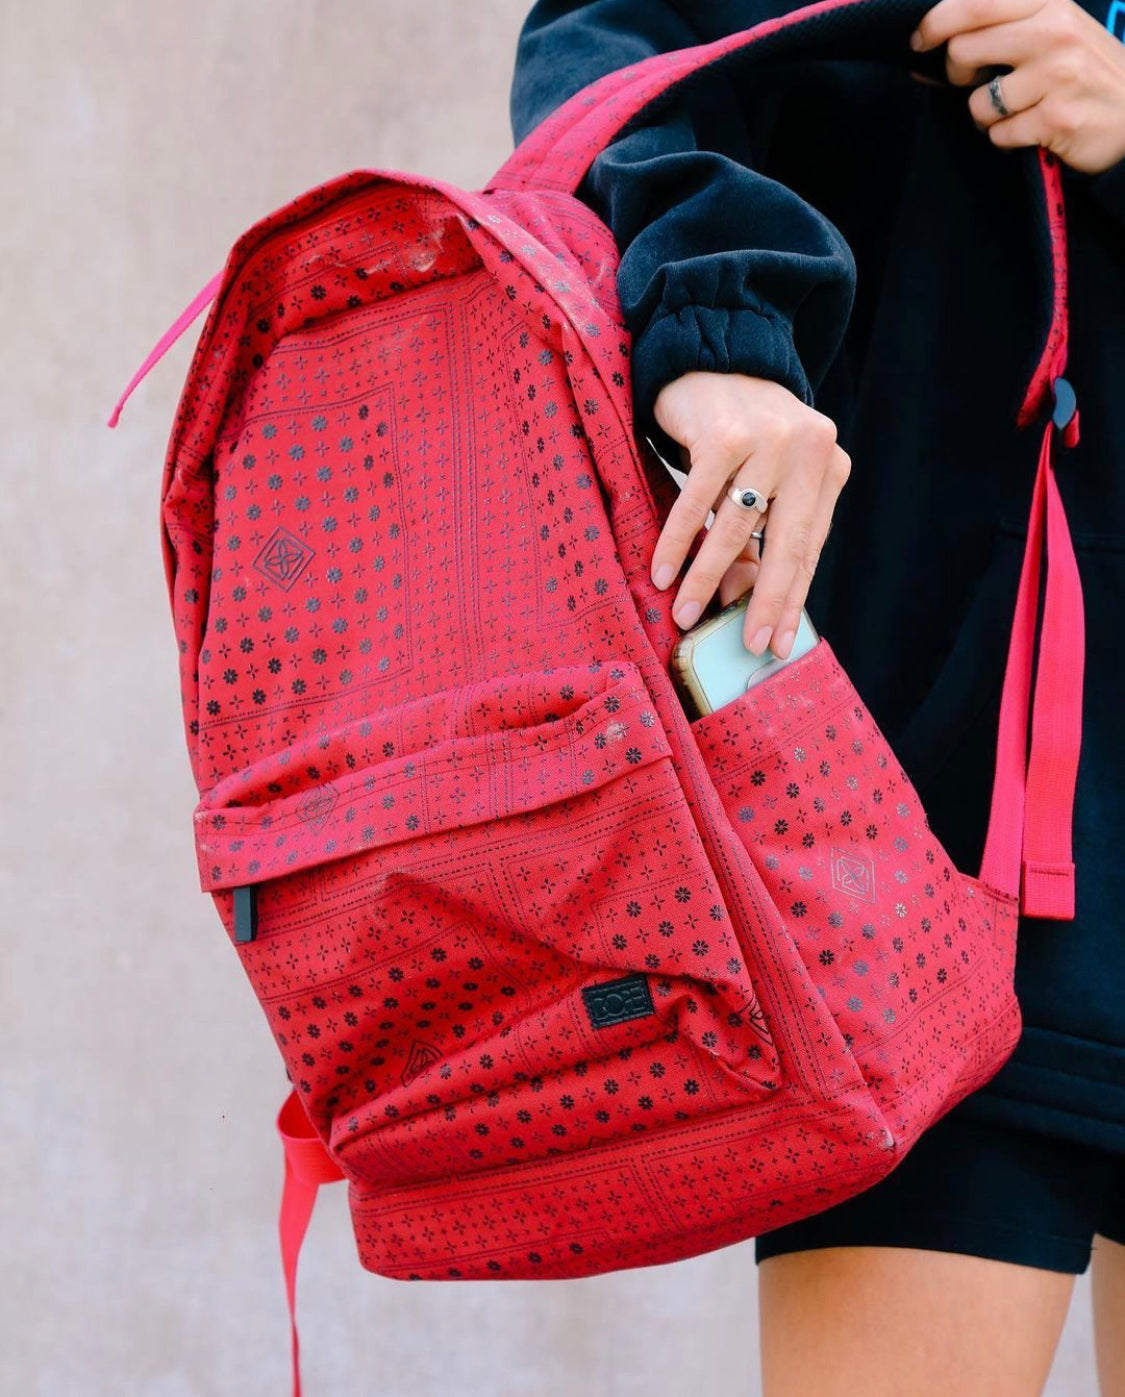 DOPE/RED-BLOOD SWEAT&TEARS BACKPACK